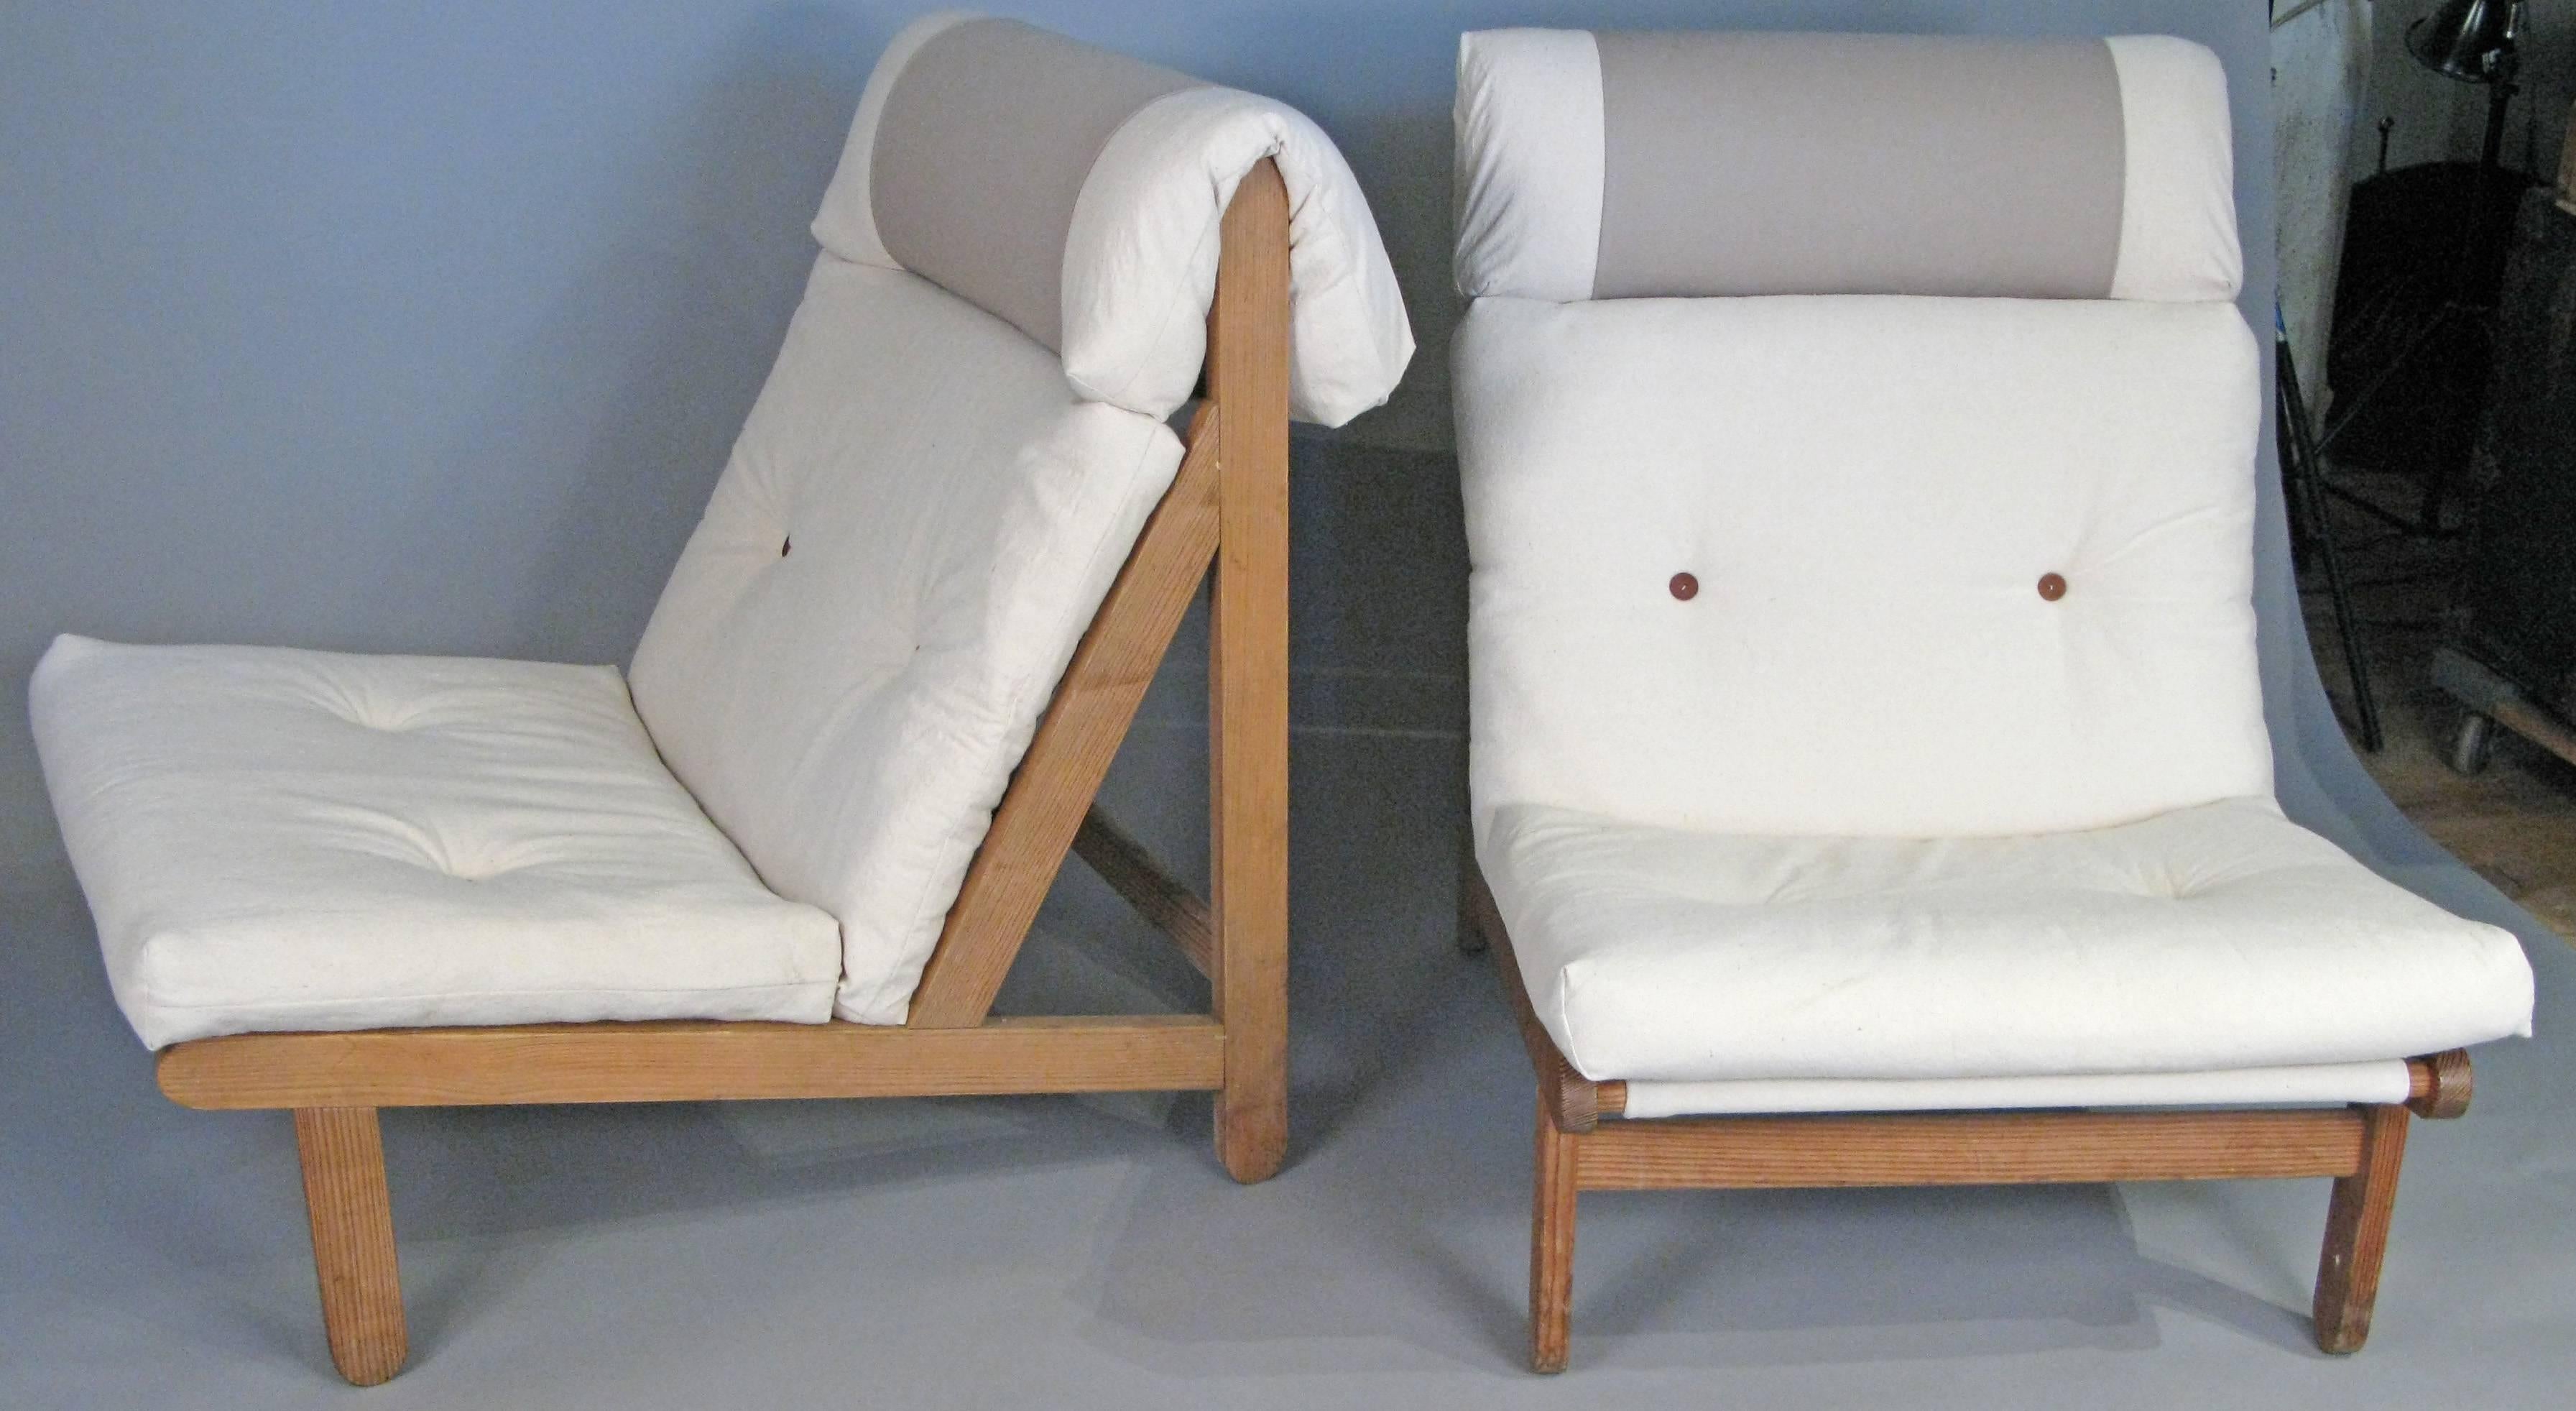 A very handsome and comfortable pair of 1960s Danish 'A Frame' Lounge chairs designed by Bernt Petersen. Beautifully made oak frames, with cushions newly recovered in cotton canvas, with the original leather buttons.